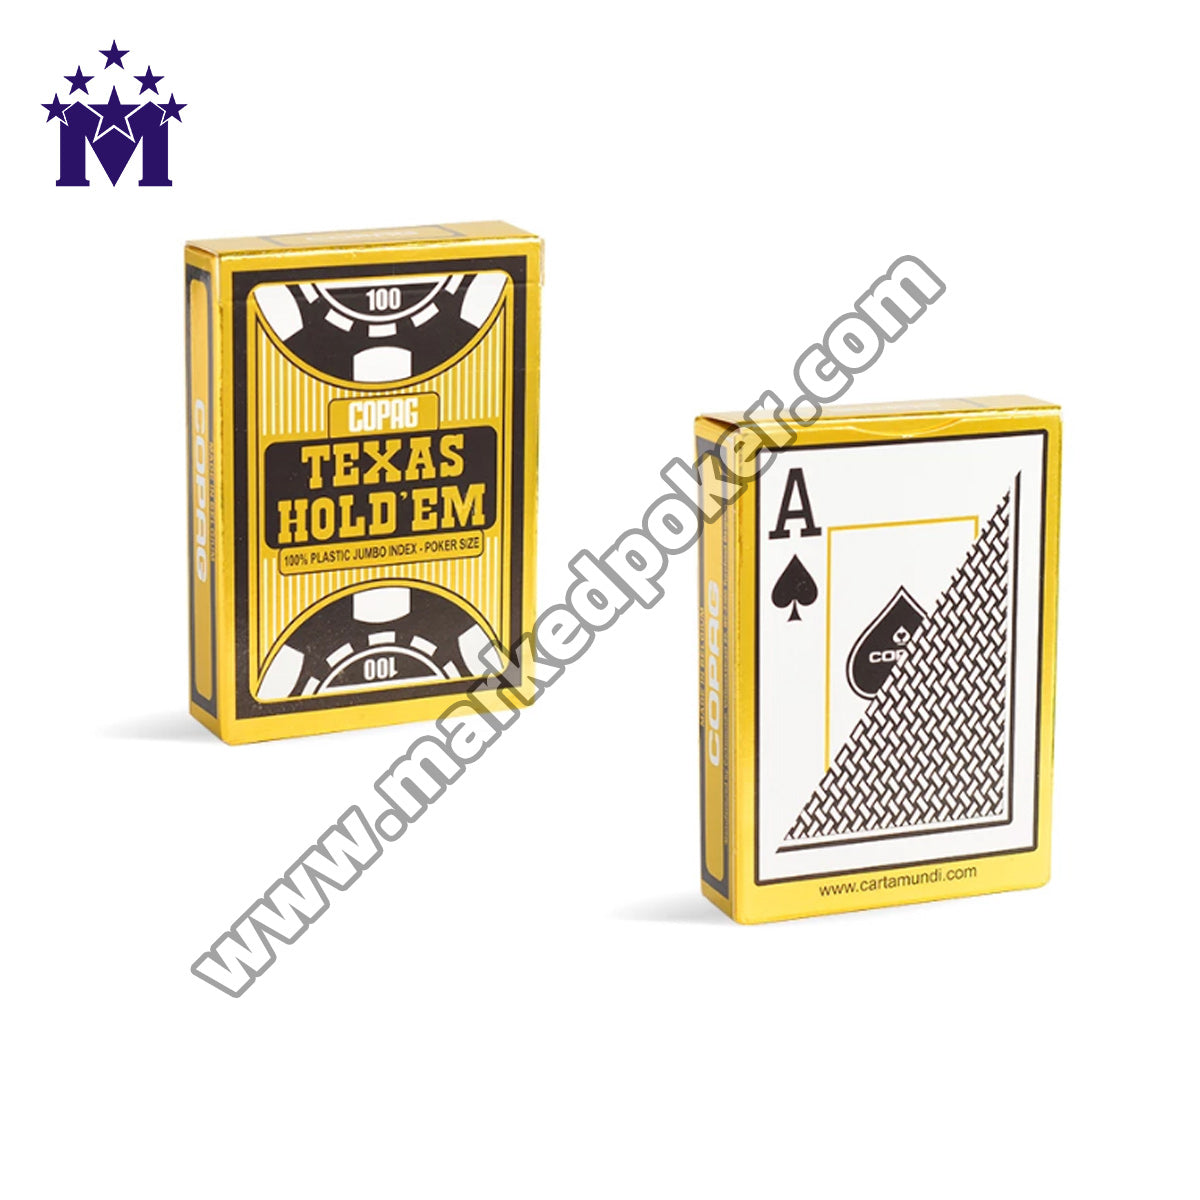 Copag Texas Holdem Decks Secret Side Barcode Marked Playing Cards